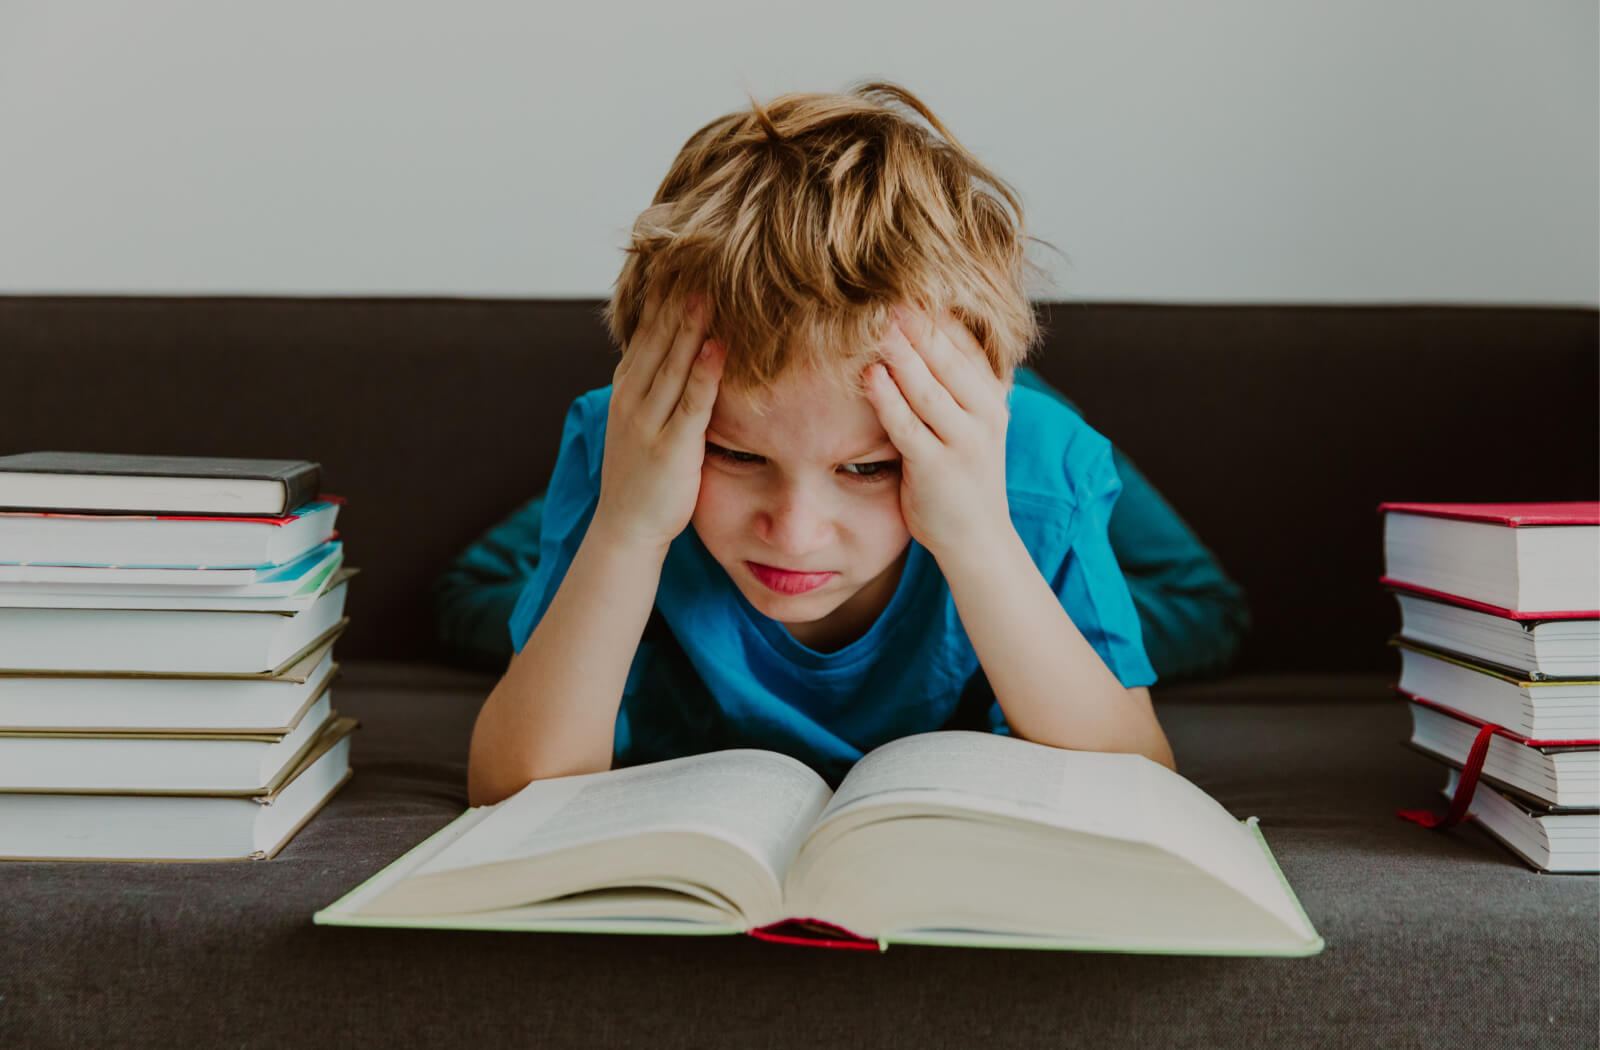 A young boy looking stressed as he tries to read a book.